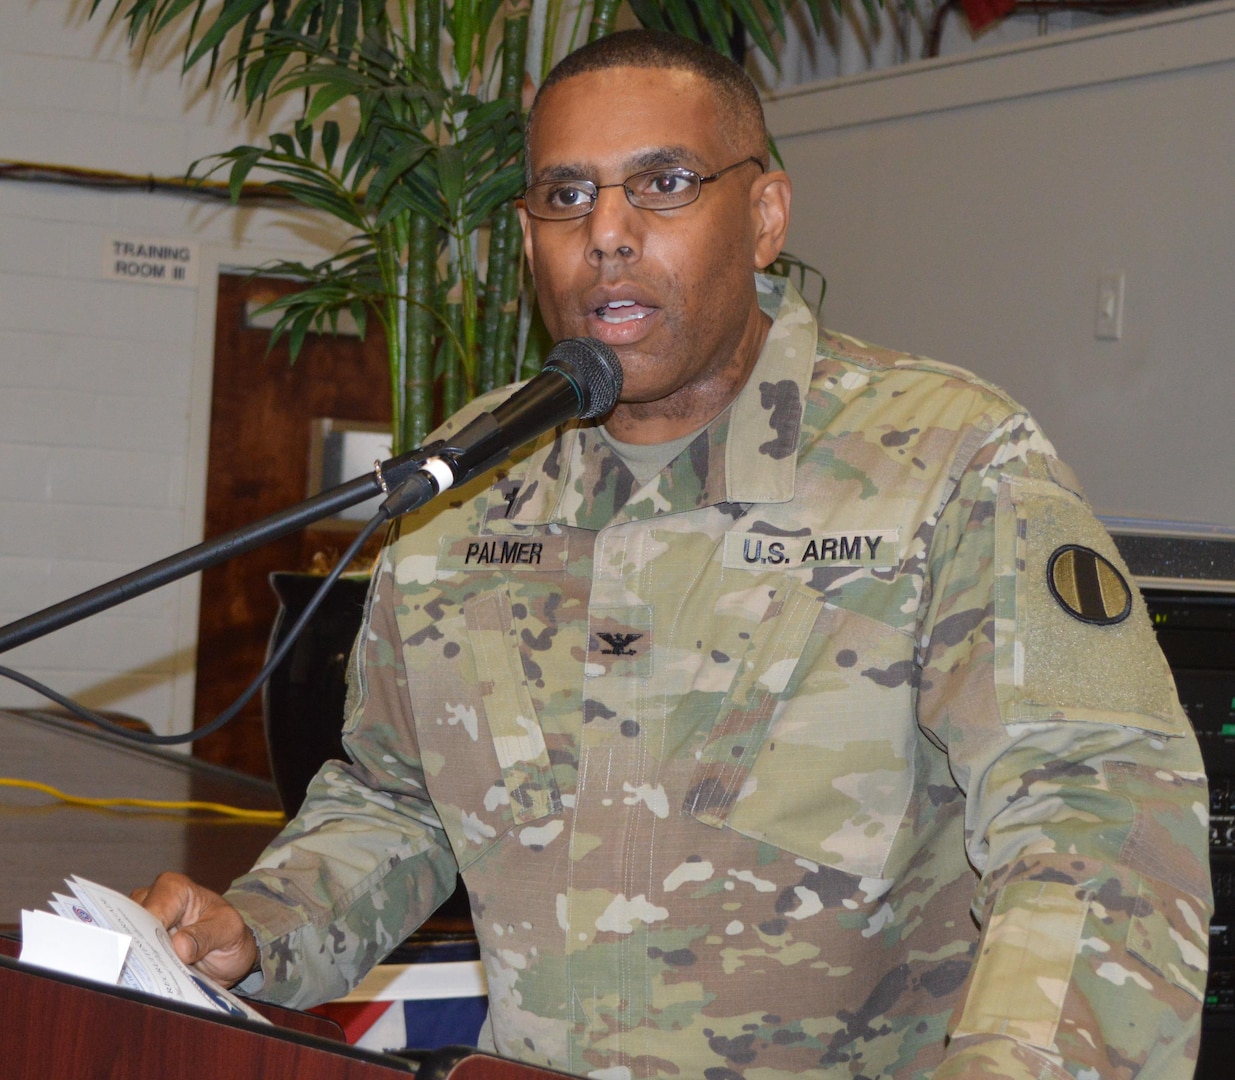 Col. James Palmer Jr., command chaplain for the U.S. Army Training and Doctrine Command, spent an hour at the 5th Recruiting Brigade Headquarters conducting a question-and-answer forum with Soldiers from the San Antonio Recruiting Battalion’s Company E as part of the annual prayer luncheon.